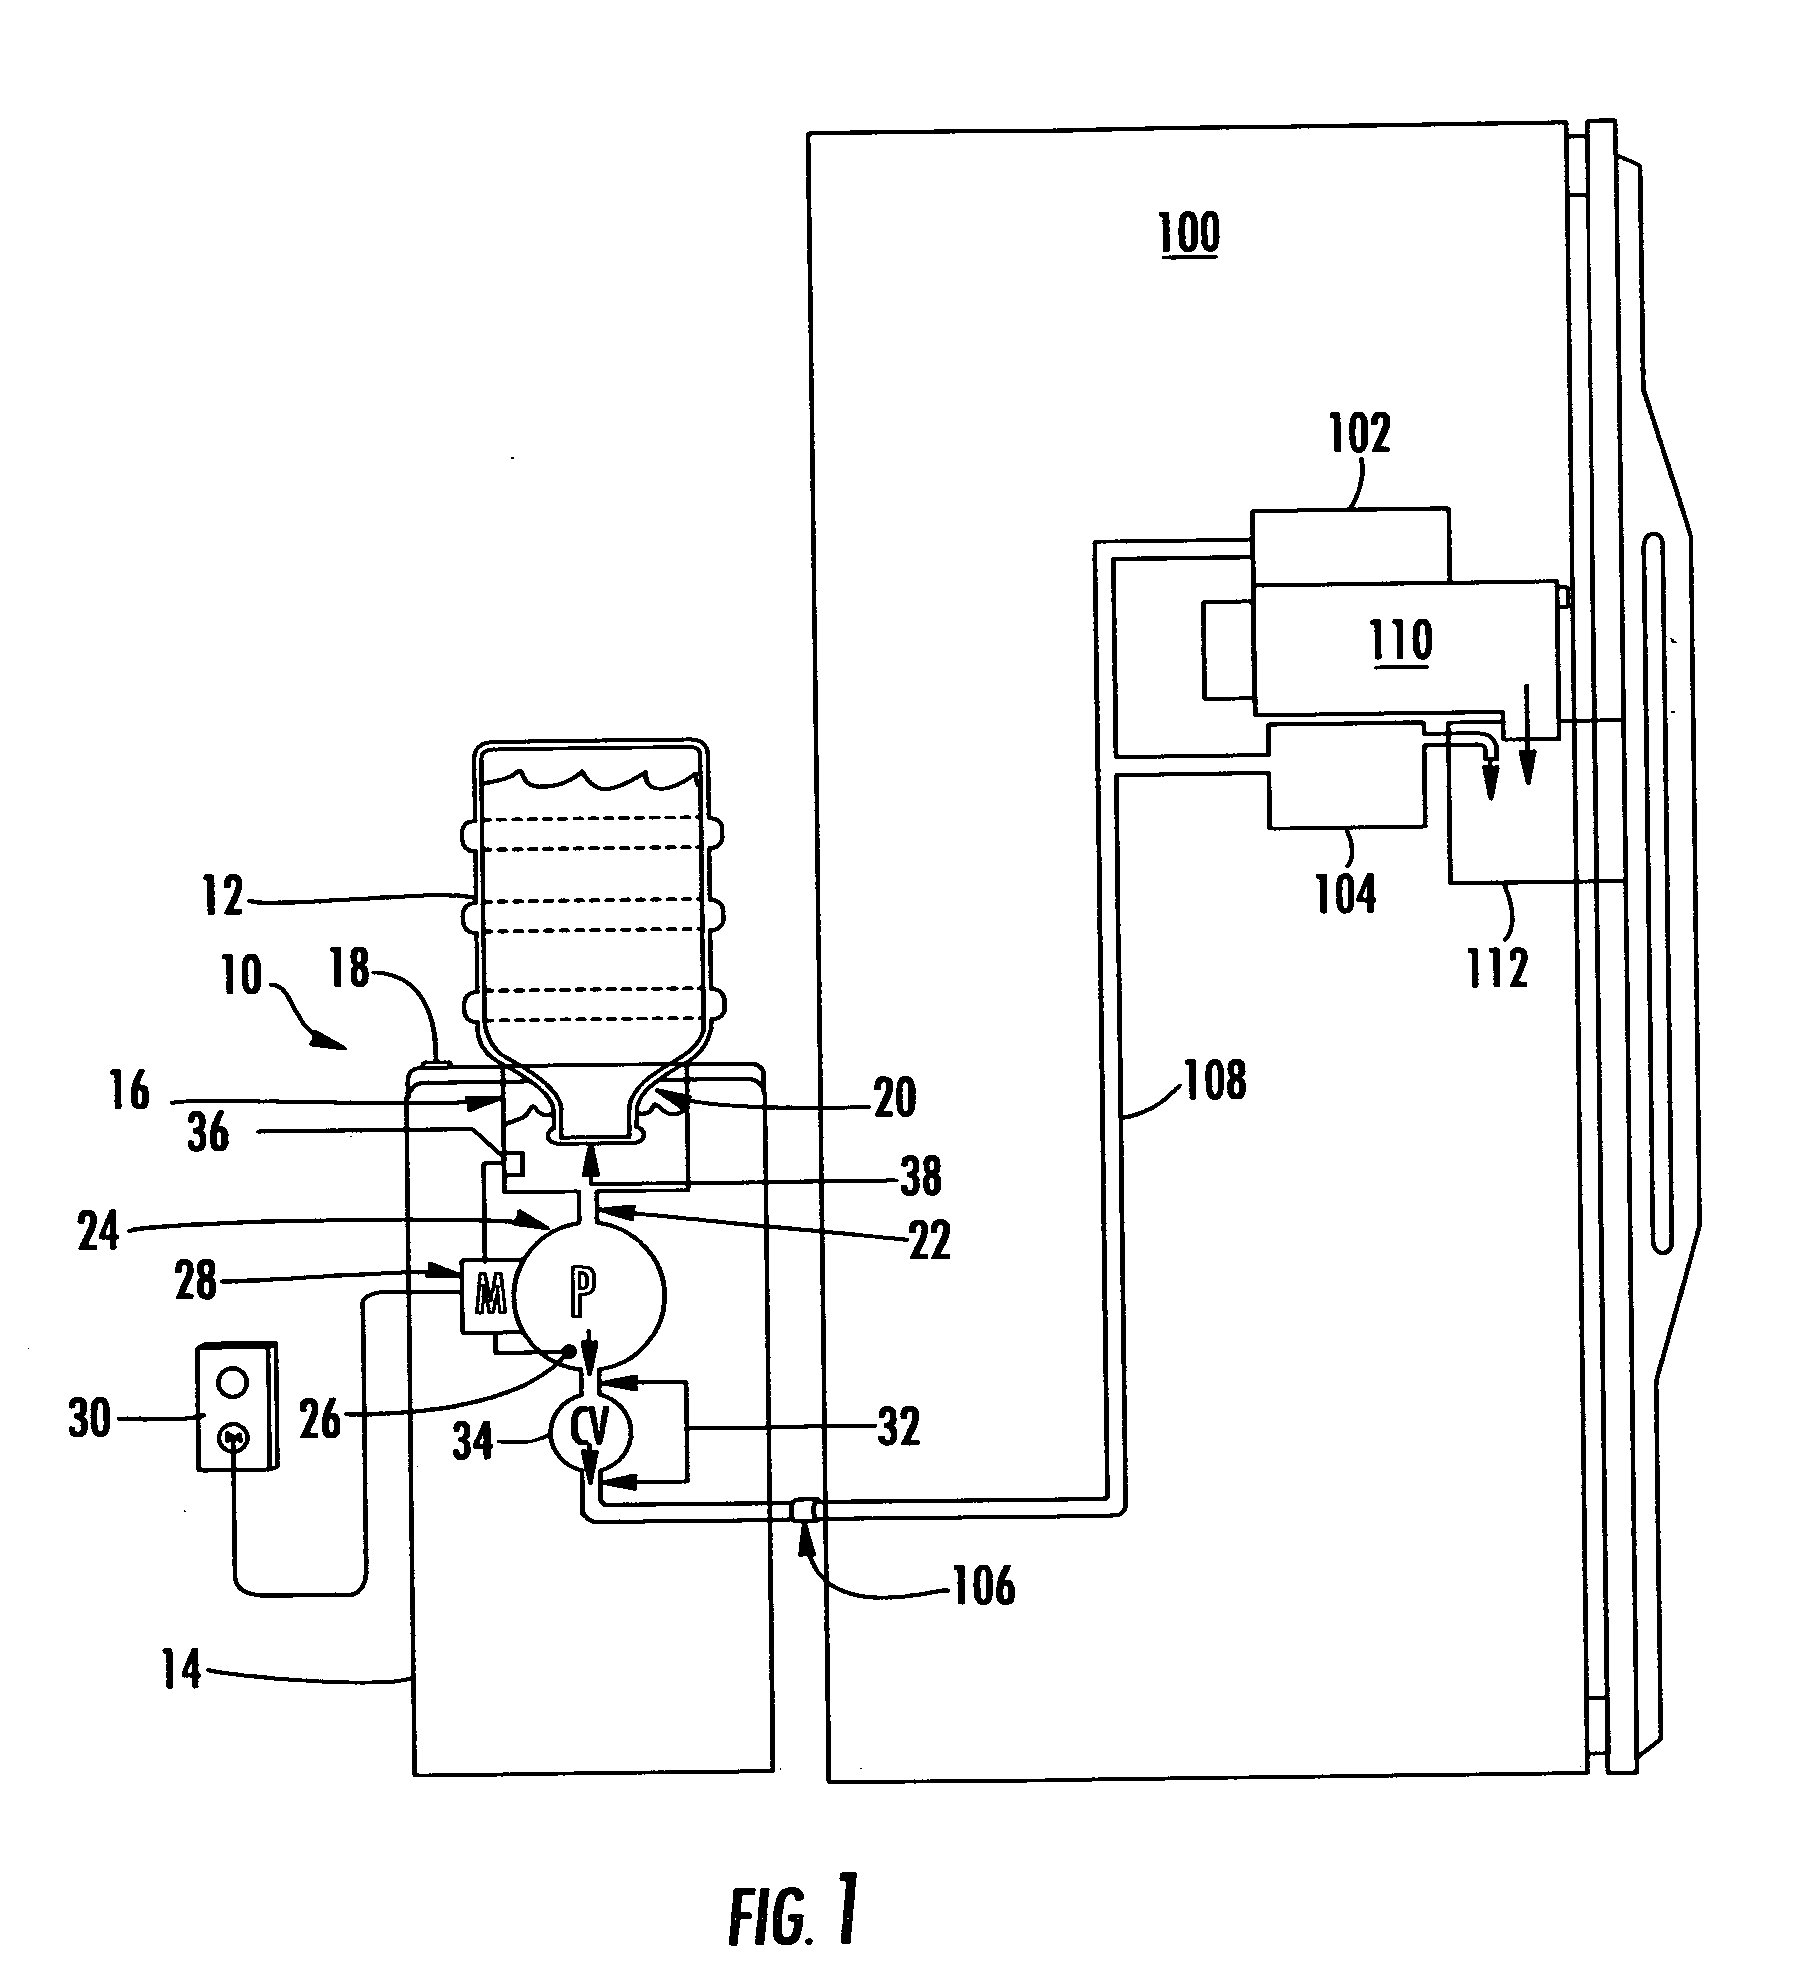 Method and apparatus for delivering bottled water to an automatic ice maker and water chiller